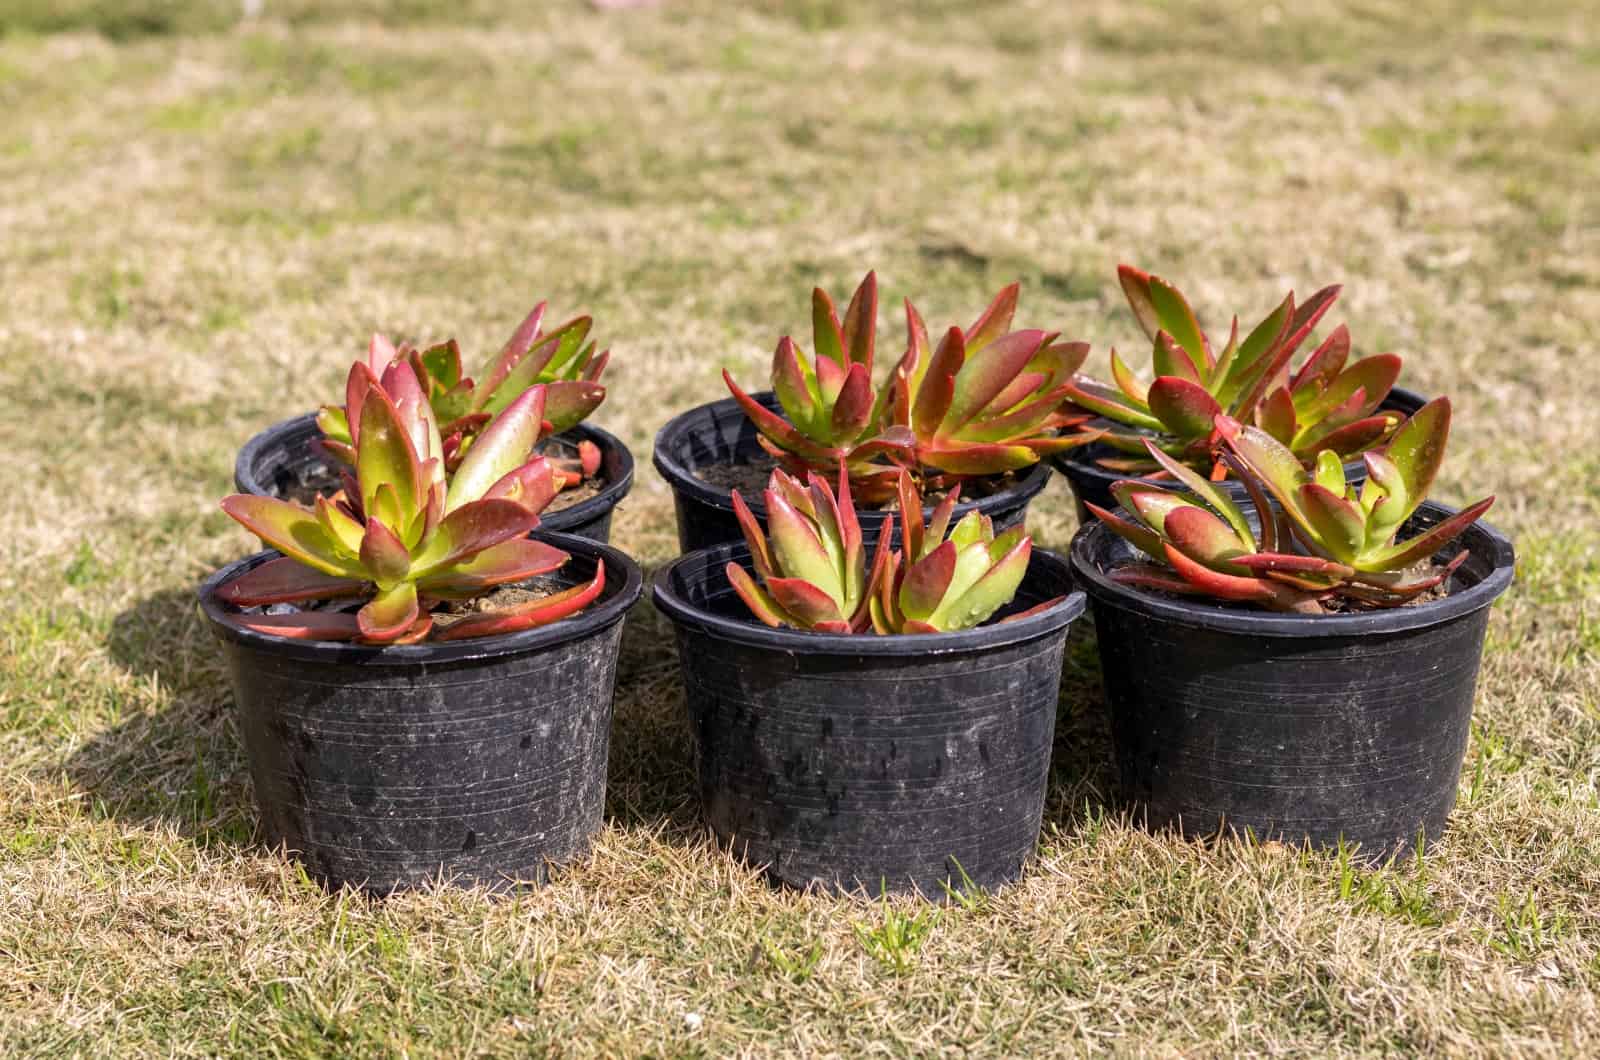 Campfire Succulent in black pots sitting on grass